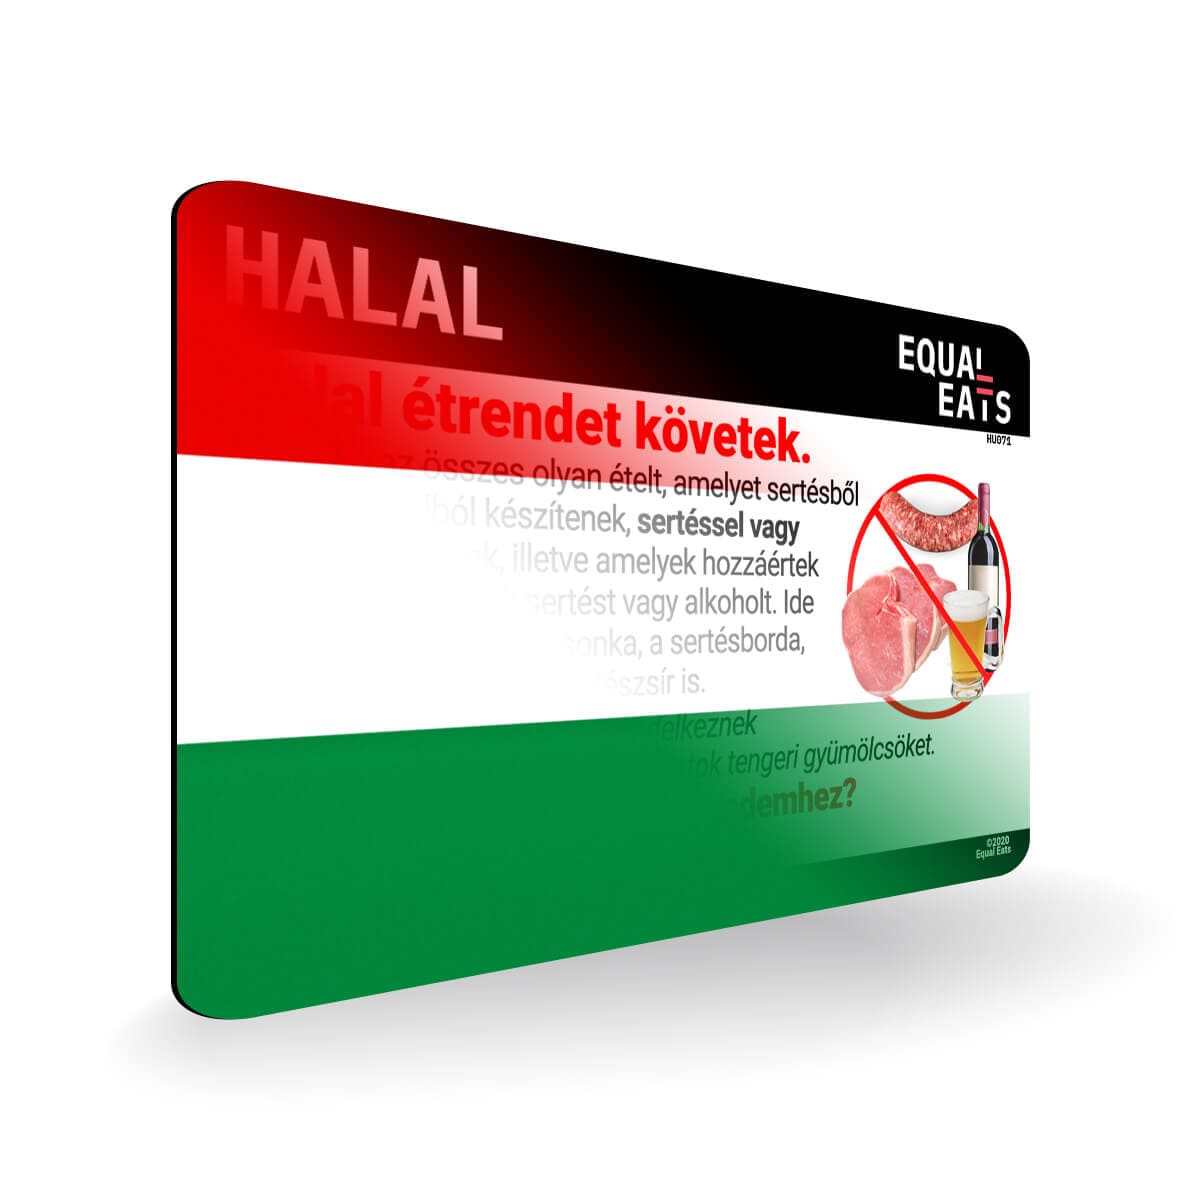 Halal Diet in Hungarian. Halal Food Card for Hungary